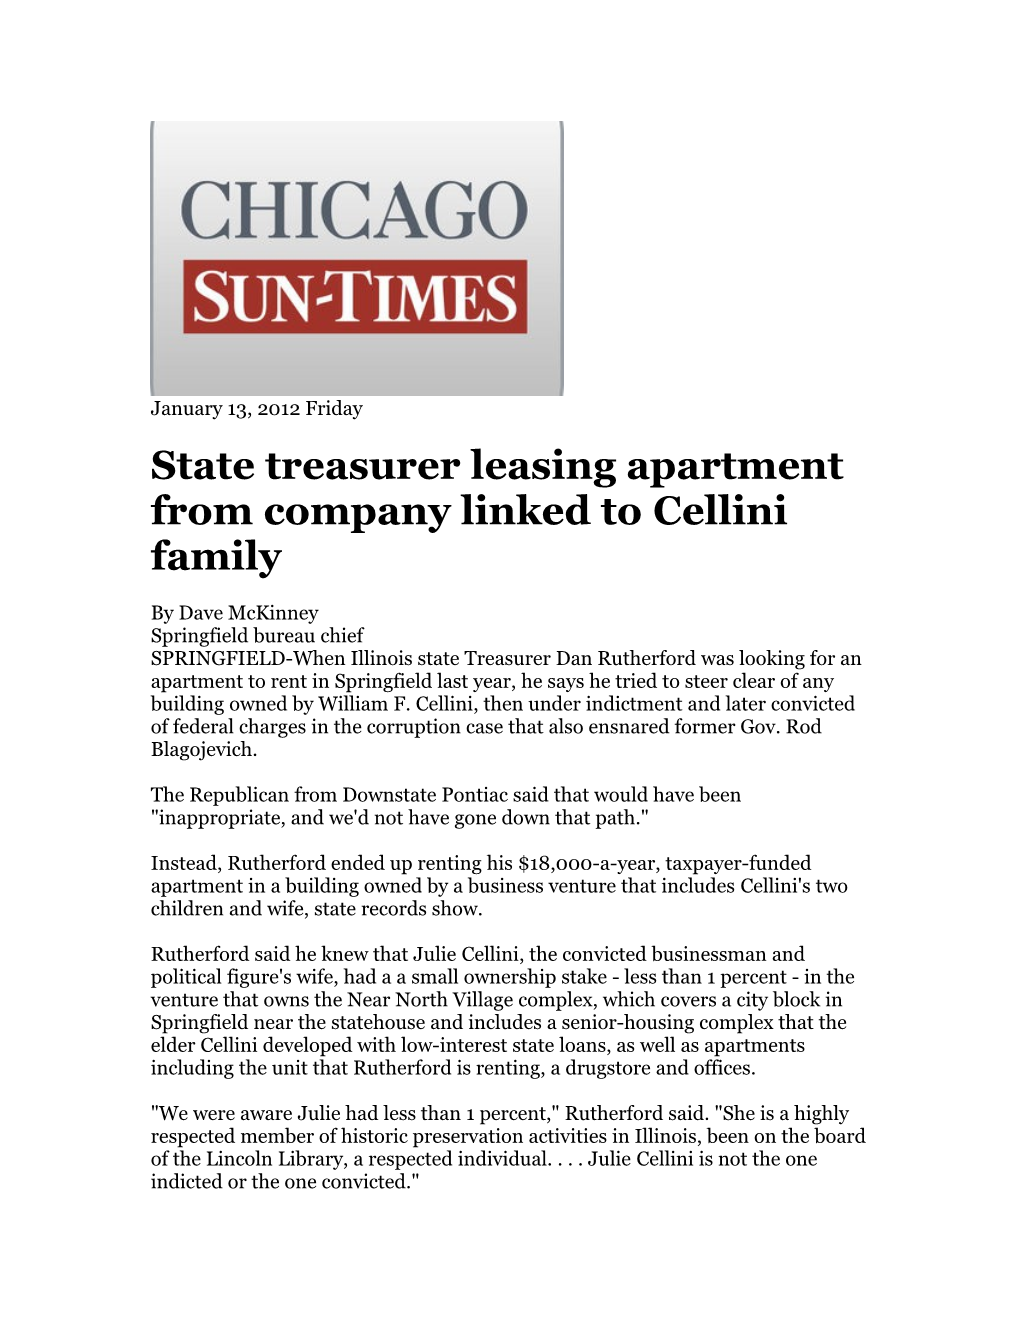 State Treasurer Leasing Apartment from Company Linked to Cellini Family